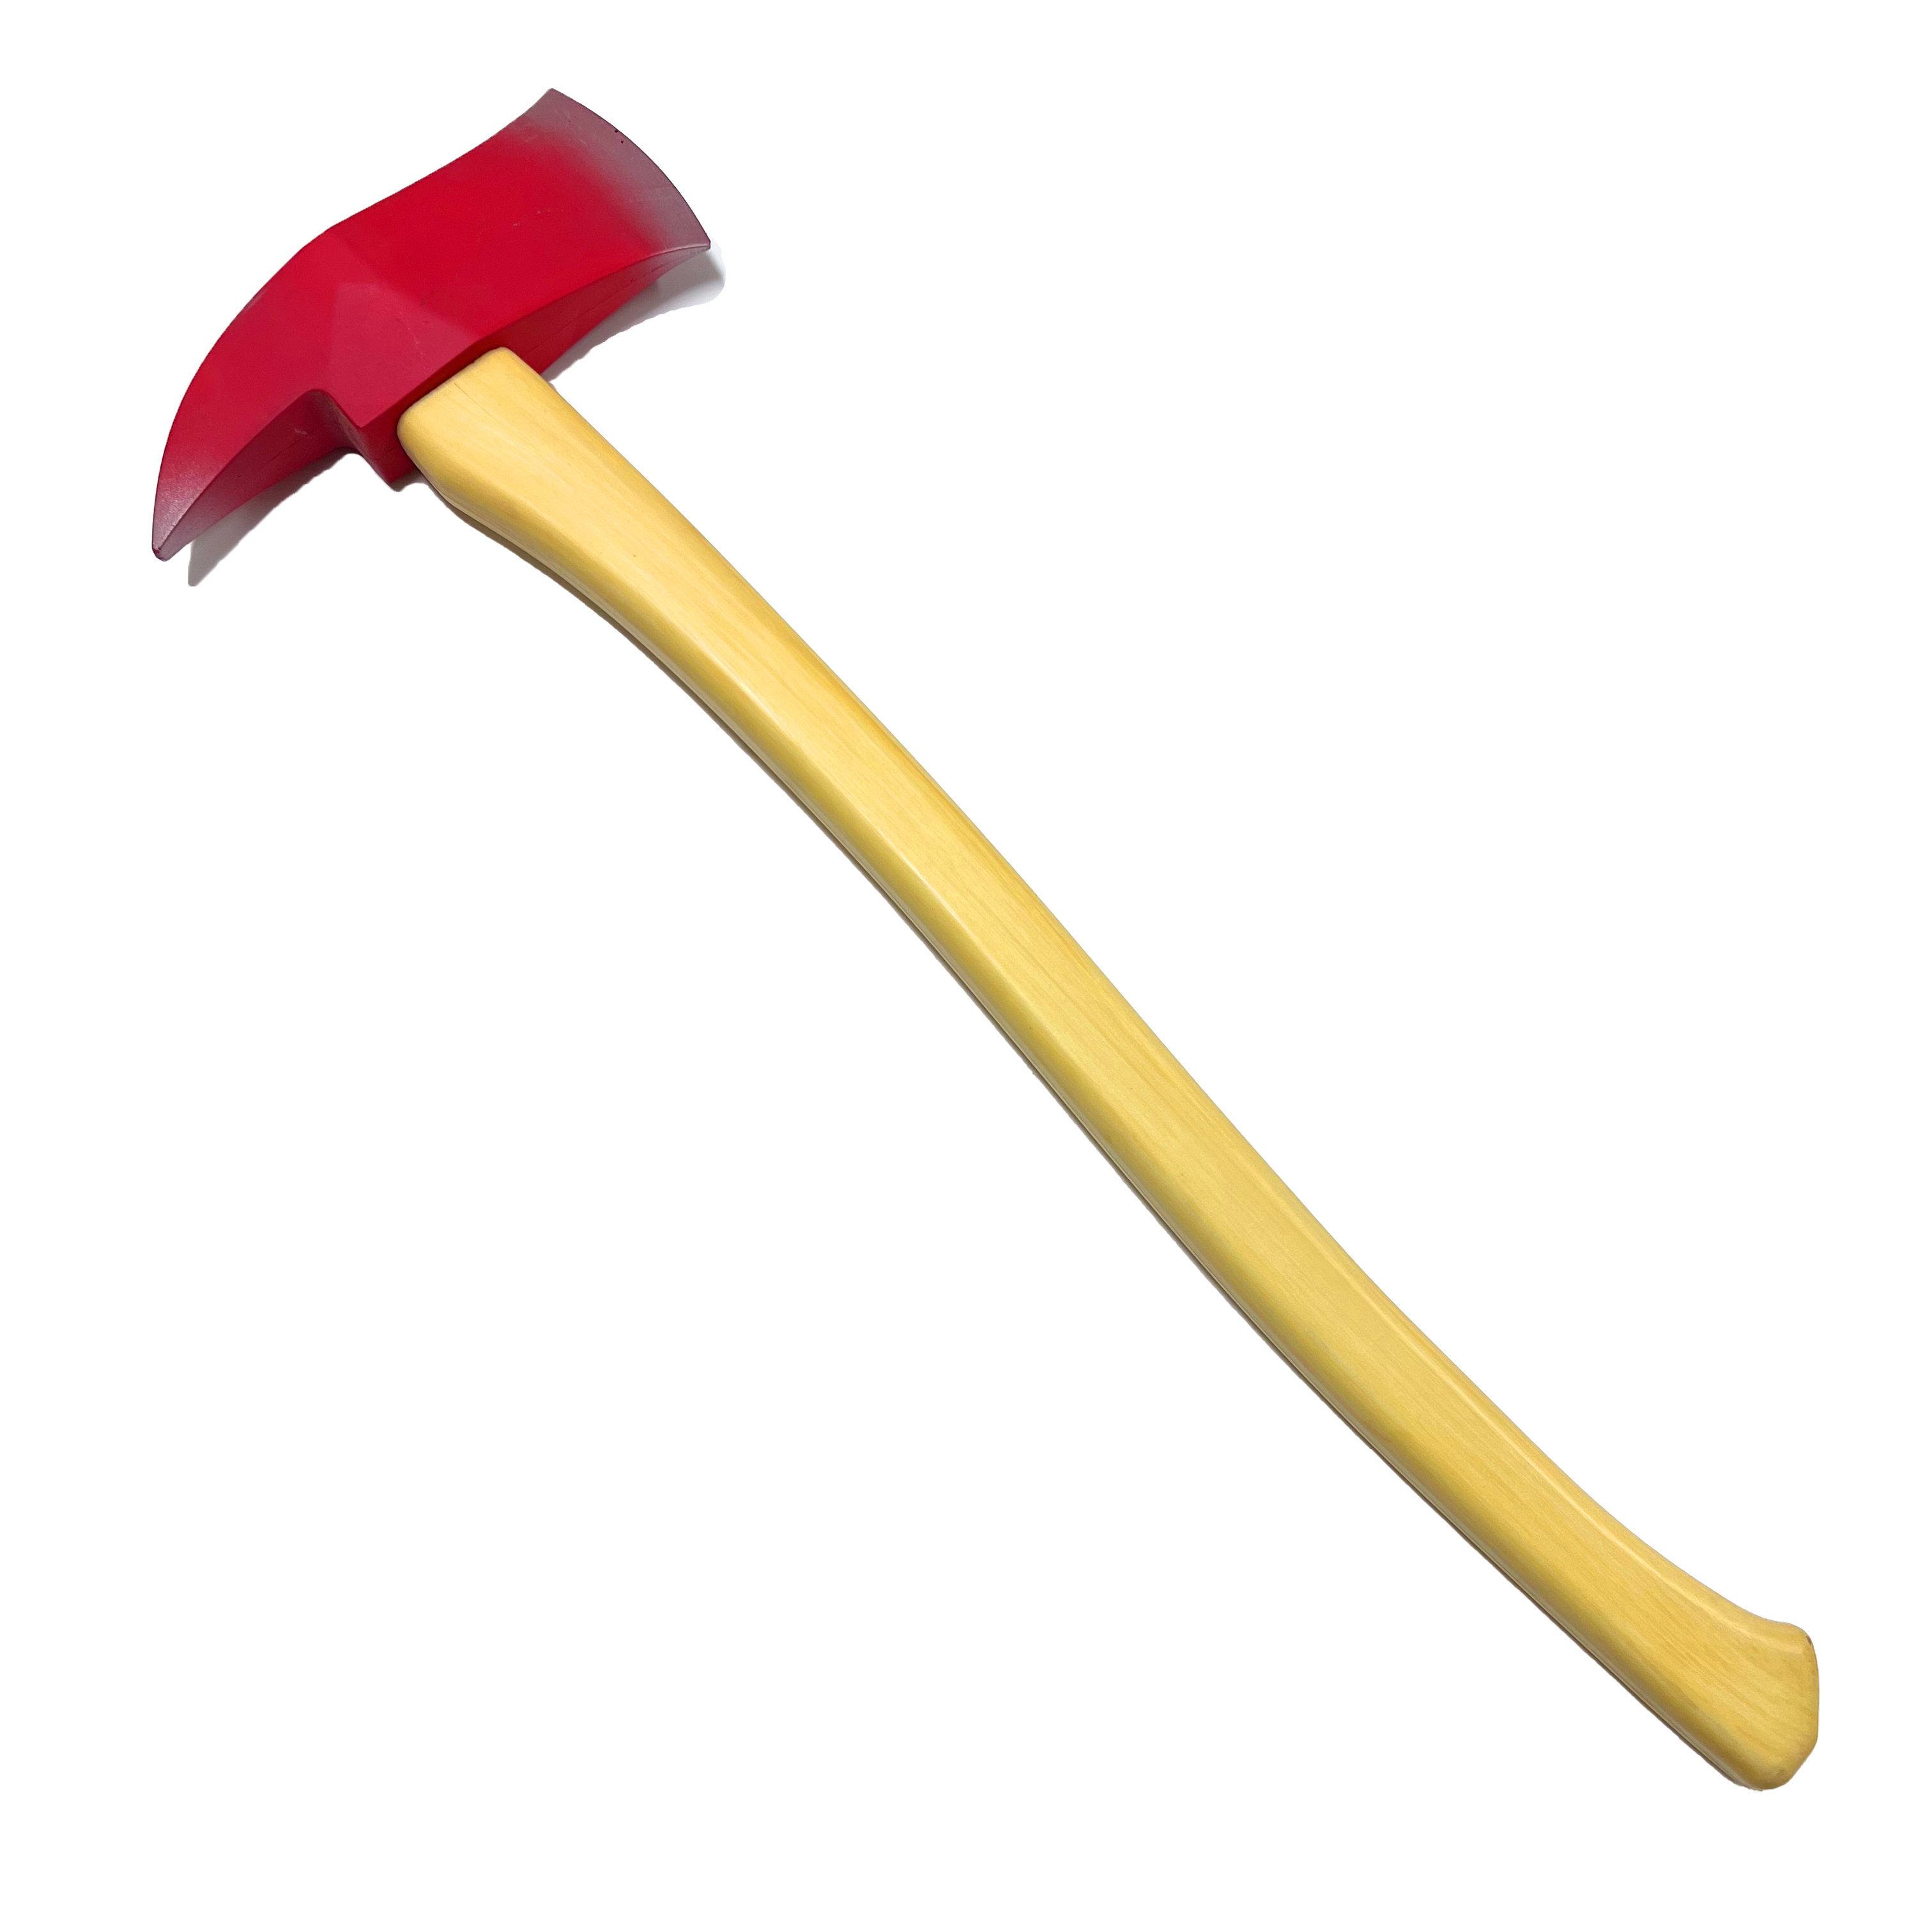 27 Inch Classic Fireman's Axe - Bright Red and Yellow